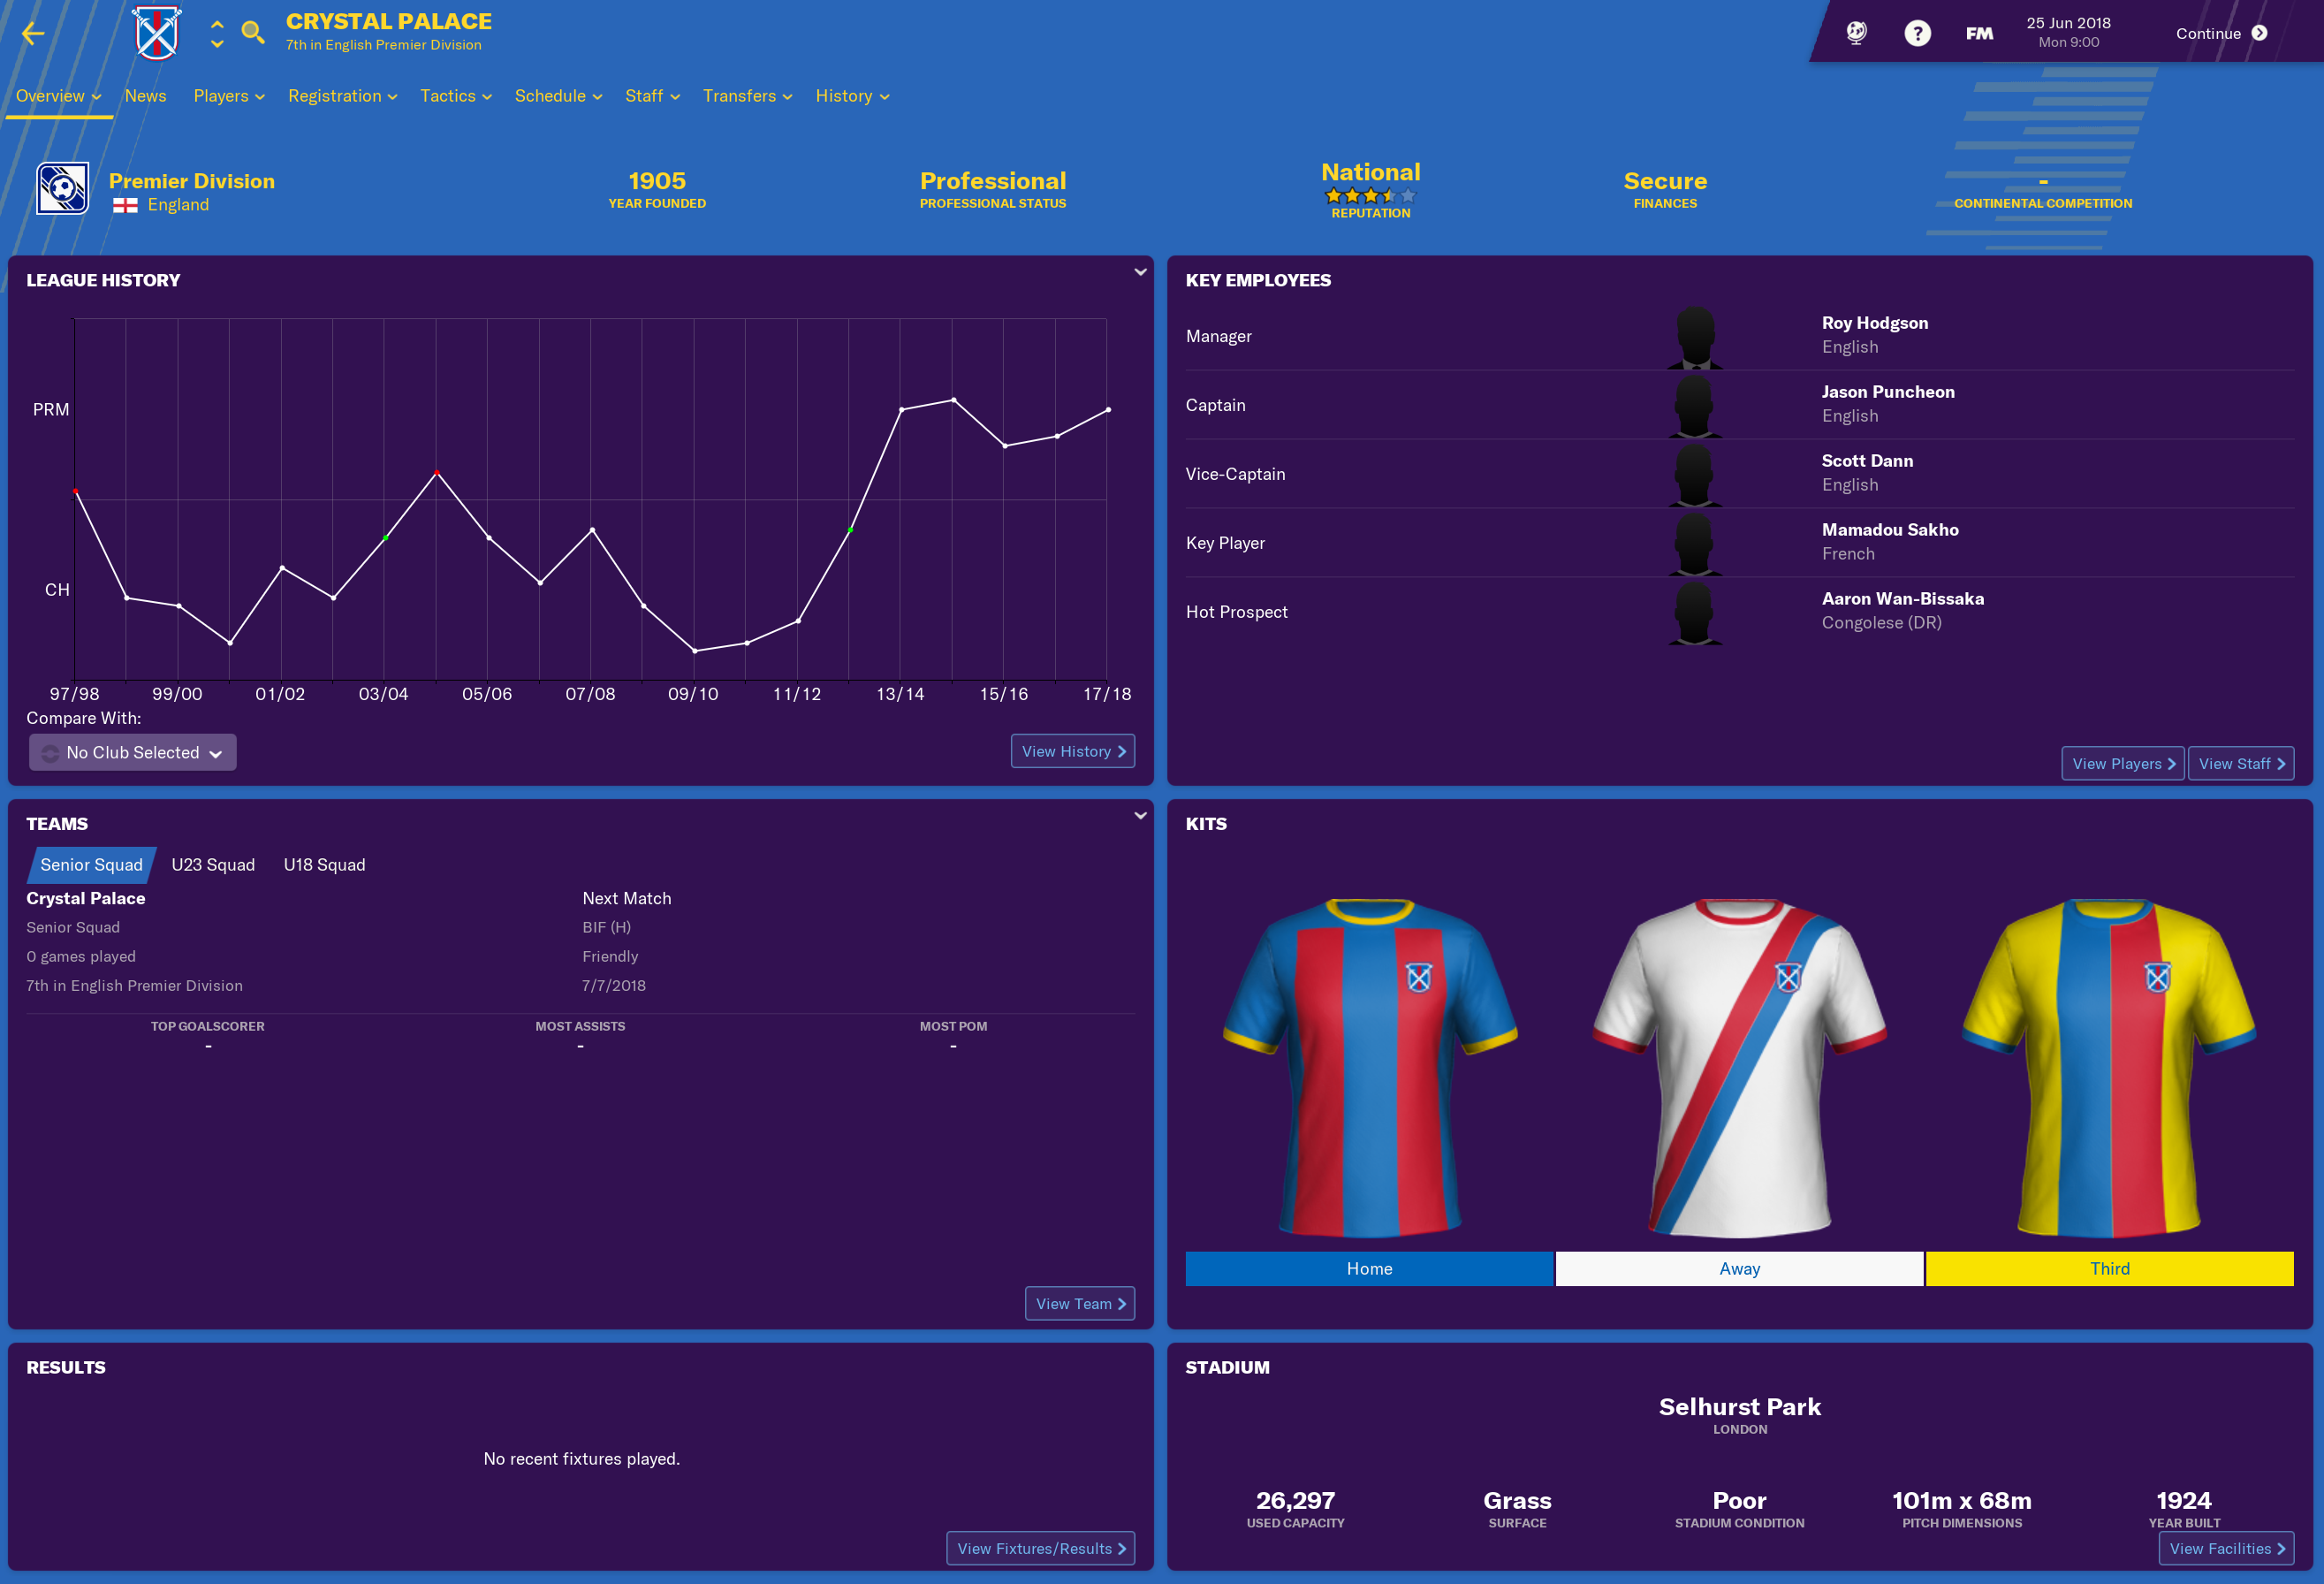 FM19 TEAM GUIDE CRYSTAL PALACE